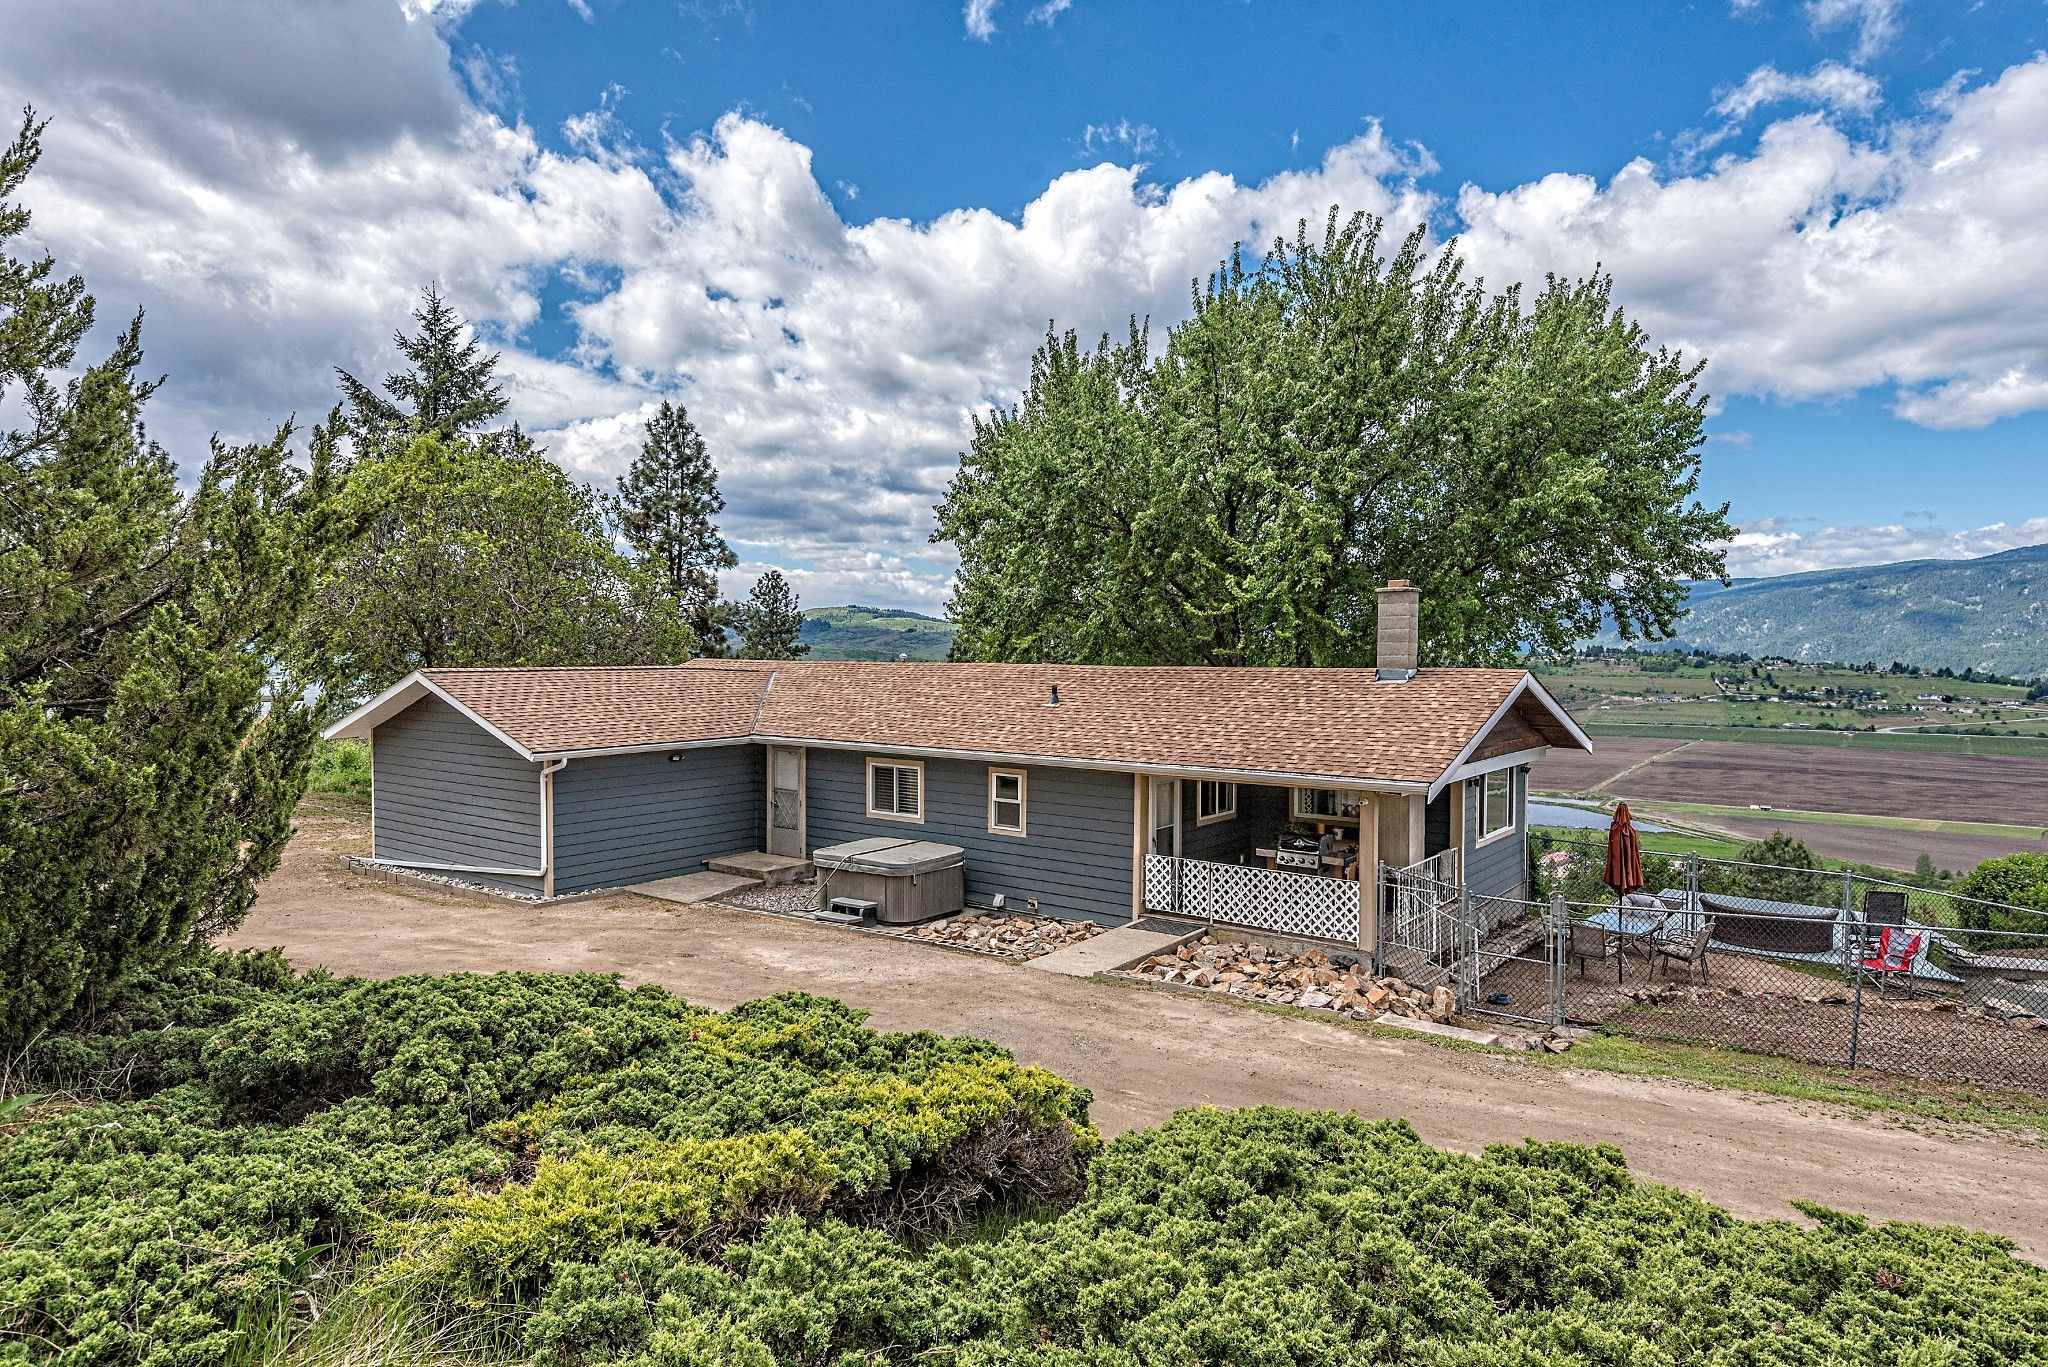 Main Photo: 210 Greenhow Road in Vernon: Armstrong/ Spall. House for sale (North Okanagan)  : MLS®# 10240012